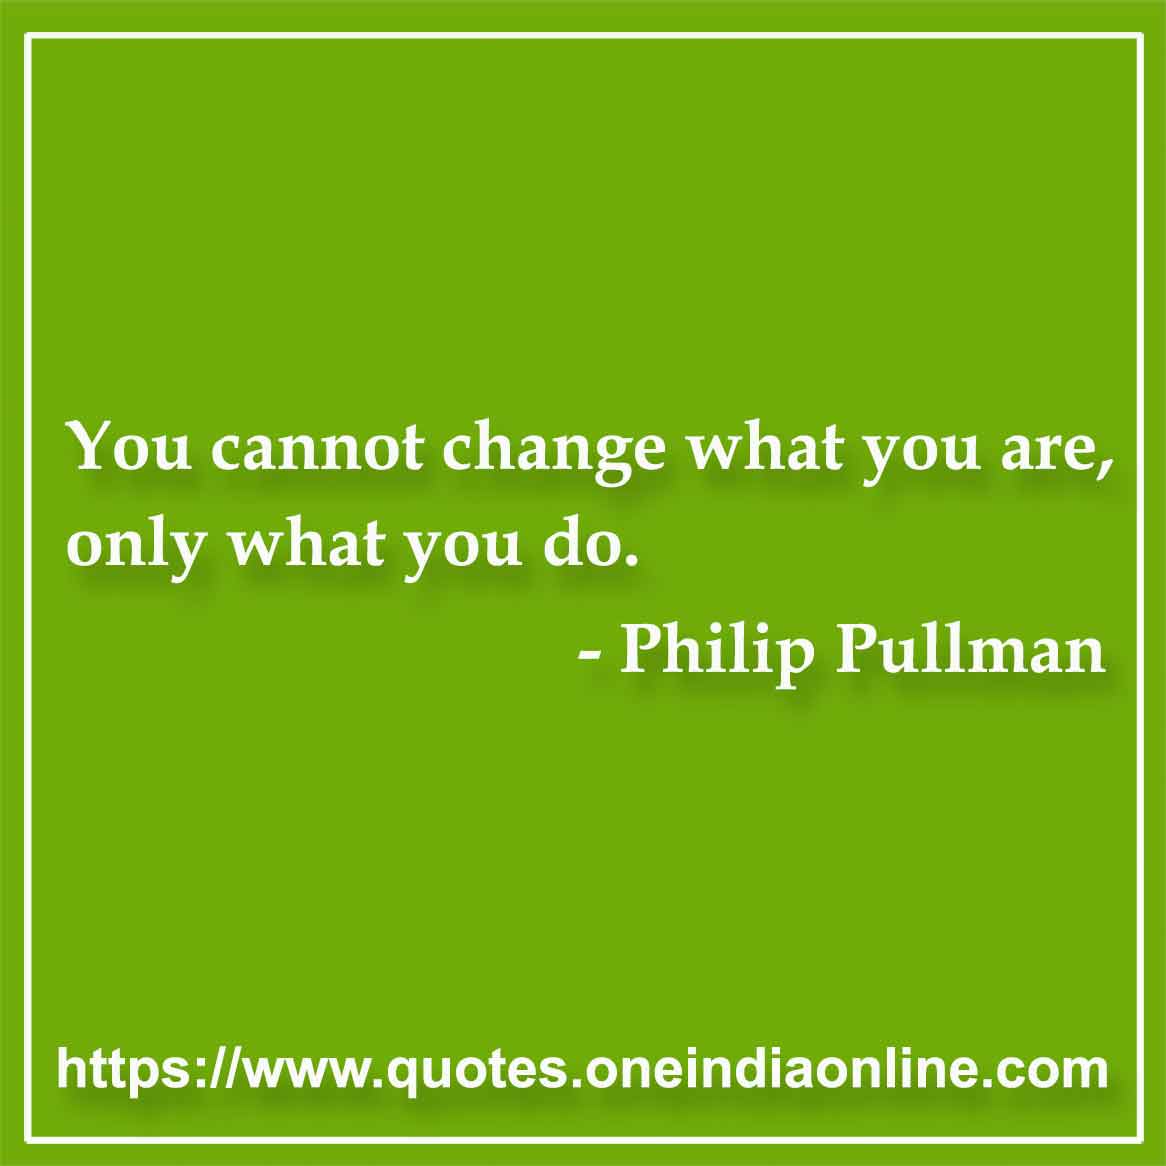 You cannot change what you are, only what you do.

- Philip Pullman